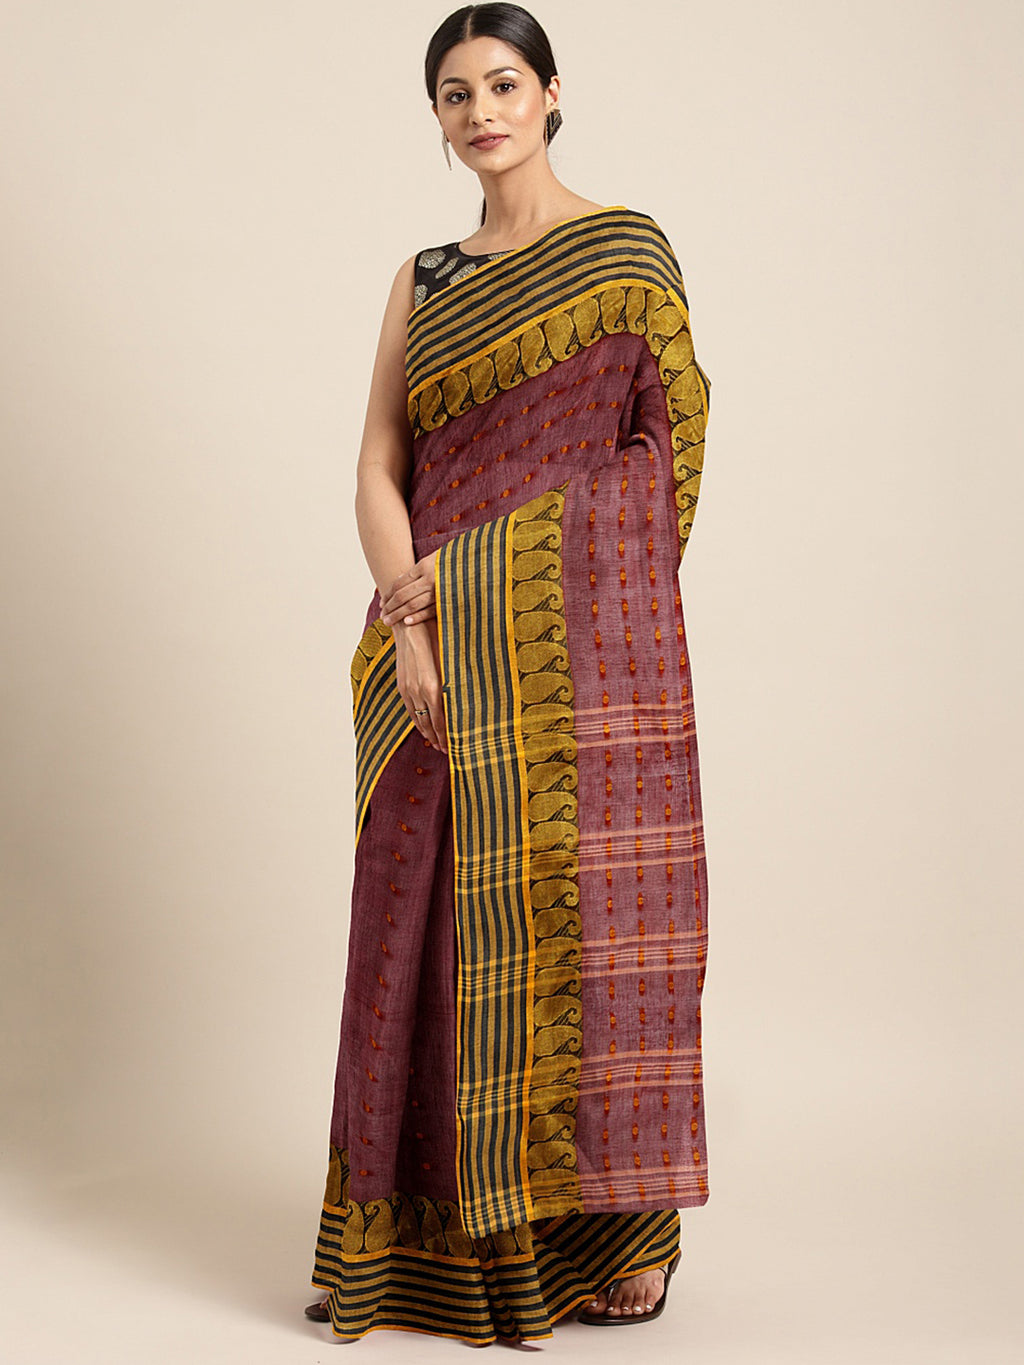 Maroon Tant Woven Design Saree Without Blouse Piece DUTASA052 DUTASA052-Saree-Kalakari India-DUTASA052-Geographical Indication, Hand Crafted, Heritage Prints, Natural Dyes, Sarees, Silk Cotton, Sustainable Fabrics, Taant, Tant, West Bengal, Woven-[Linen,Ethnic,wear,Fashionista,Handloom,Handicraft,Indigo,blockprint,block,print,Cotton,Chanderi,Blue, latest,classy,party,bollywood,trendy,summer,style,traditional,formal,elegant,unique,style,hand,block,print, dabu,booti,gift,present,glamorous,affordab